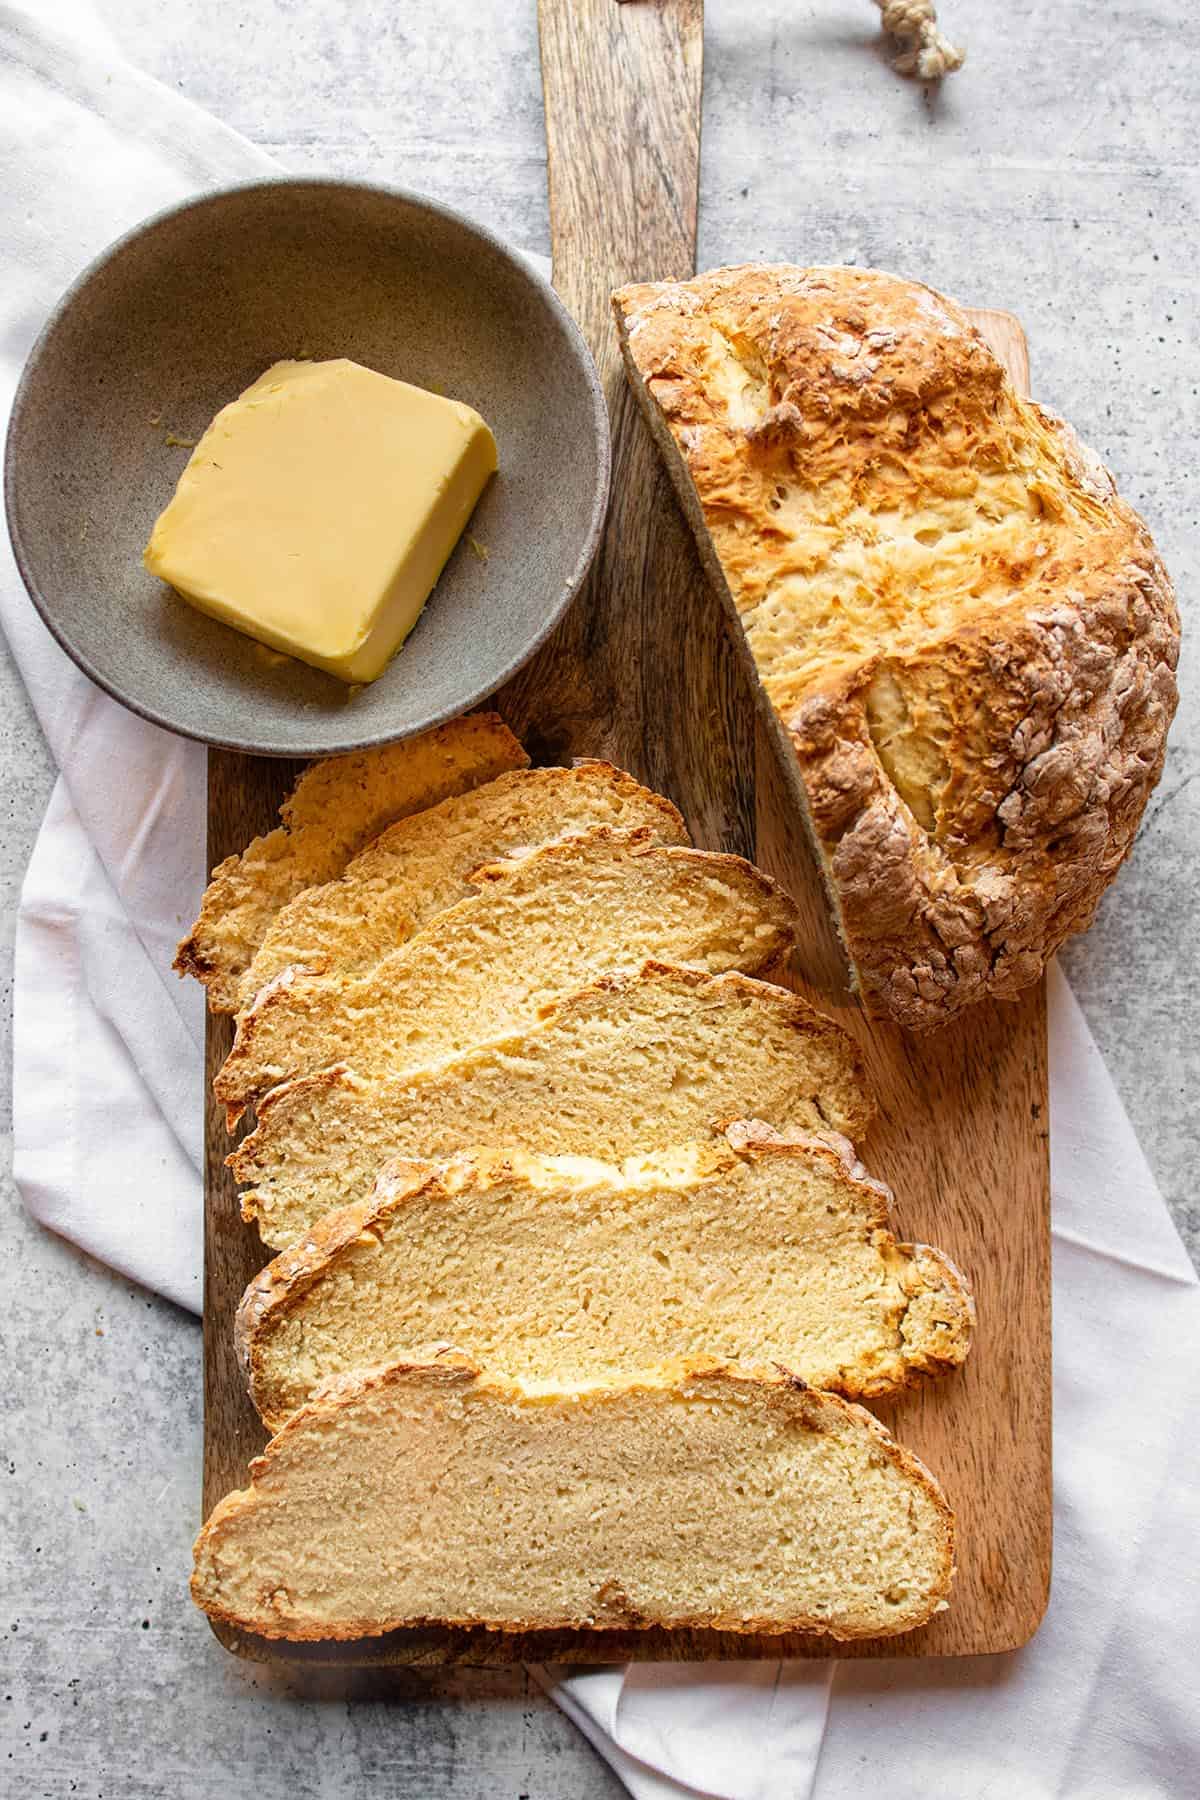 A wooden board with half a loaf of Irish soda bread with slices and a bowl of butter.